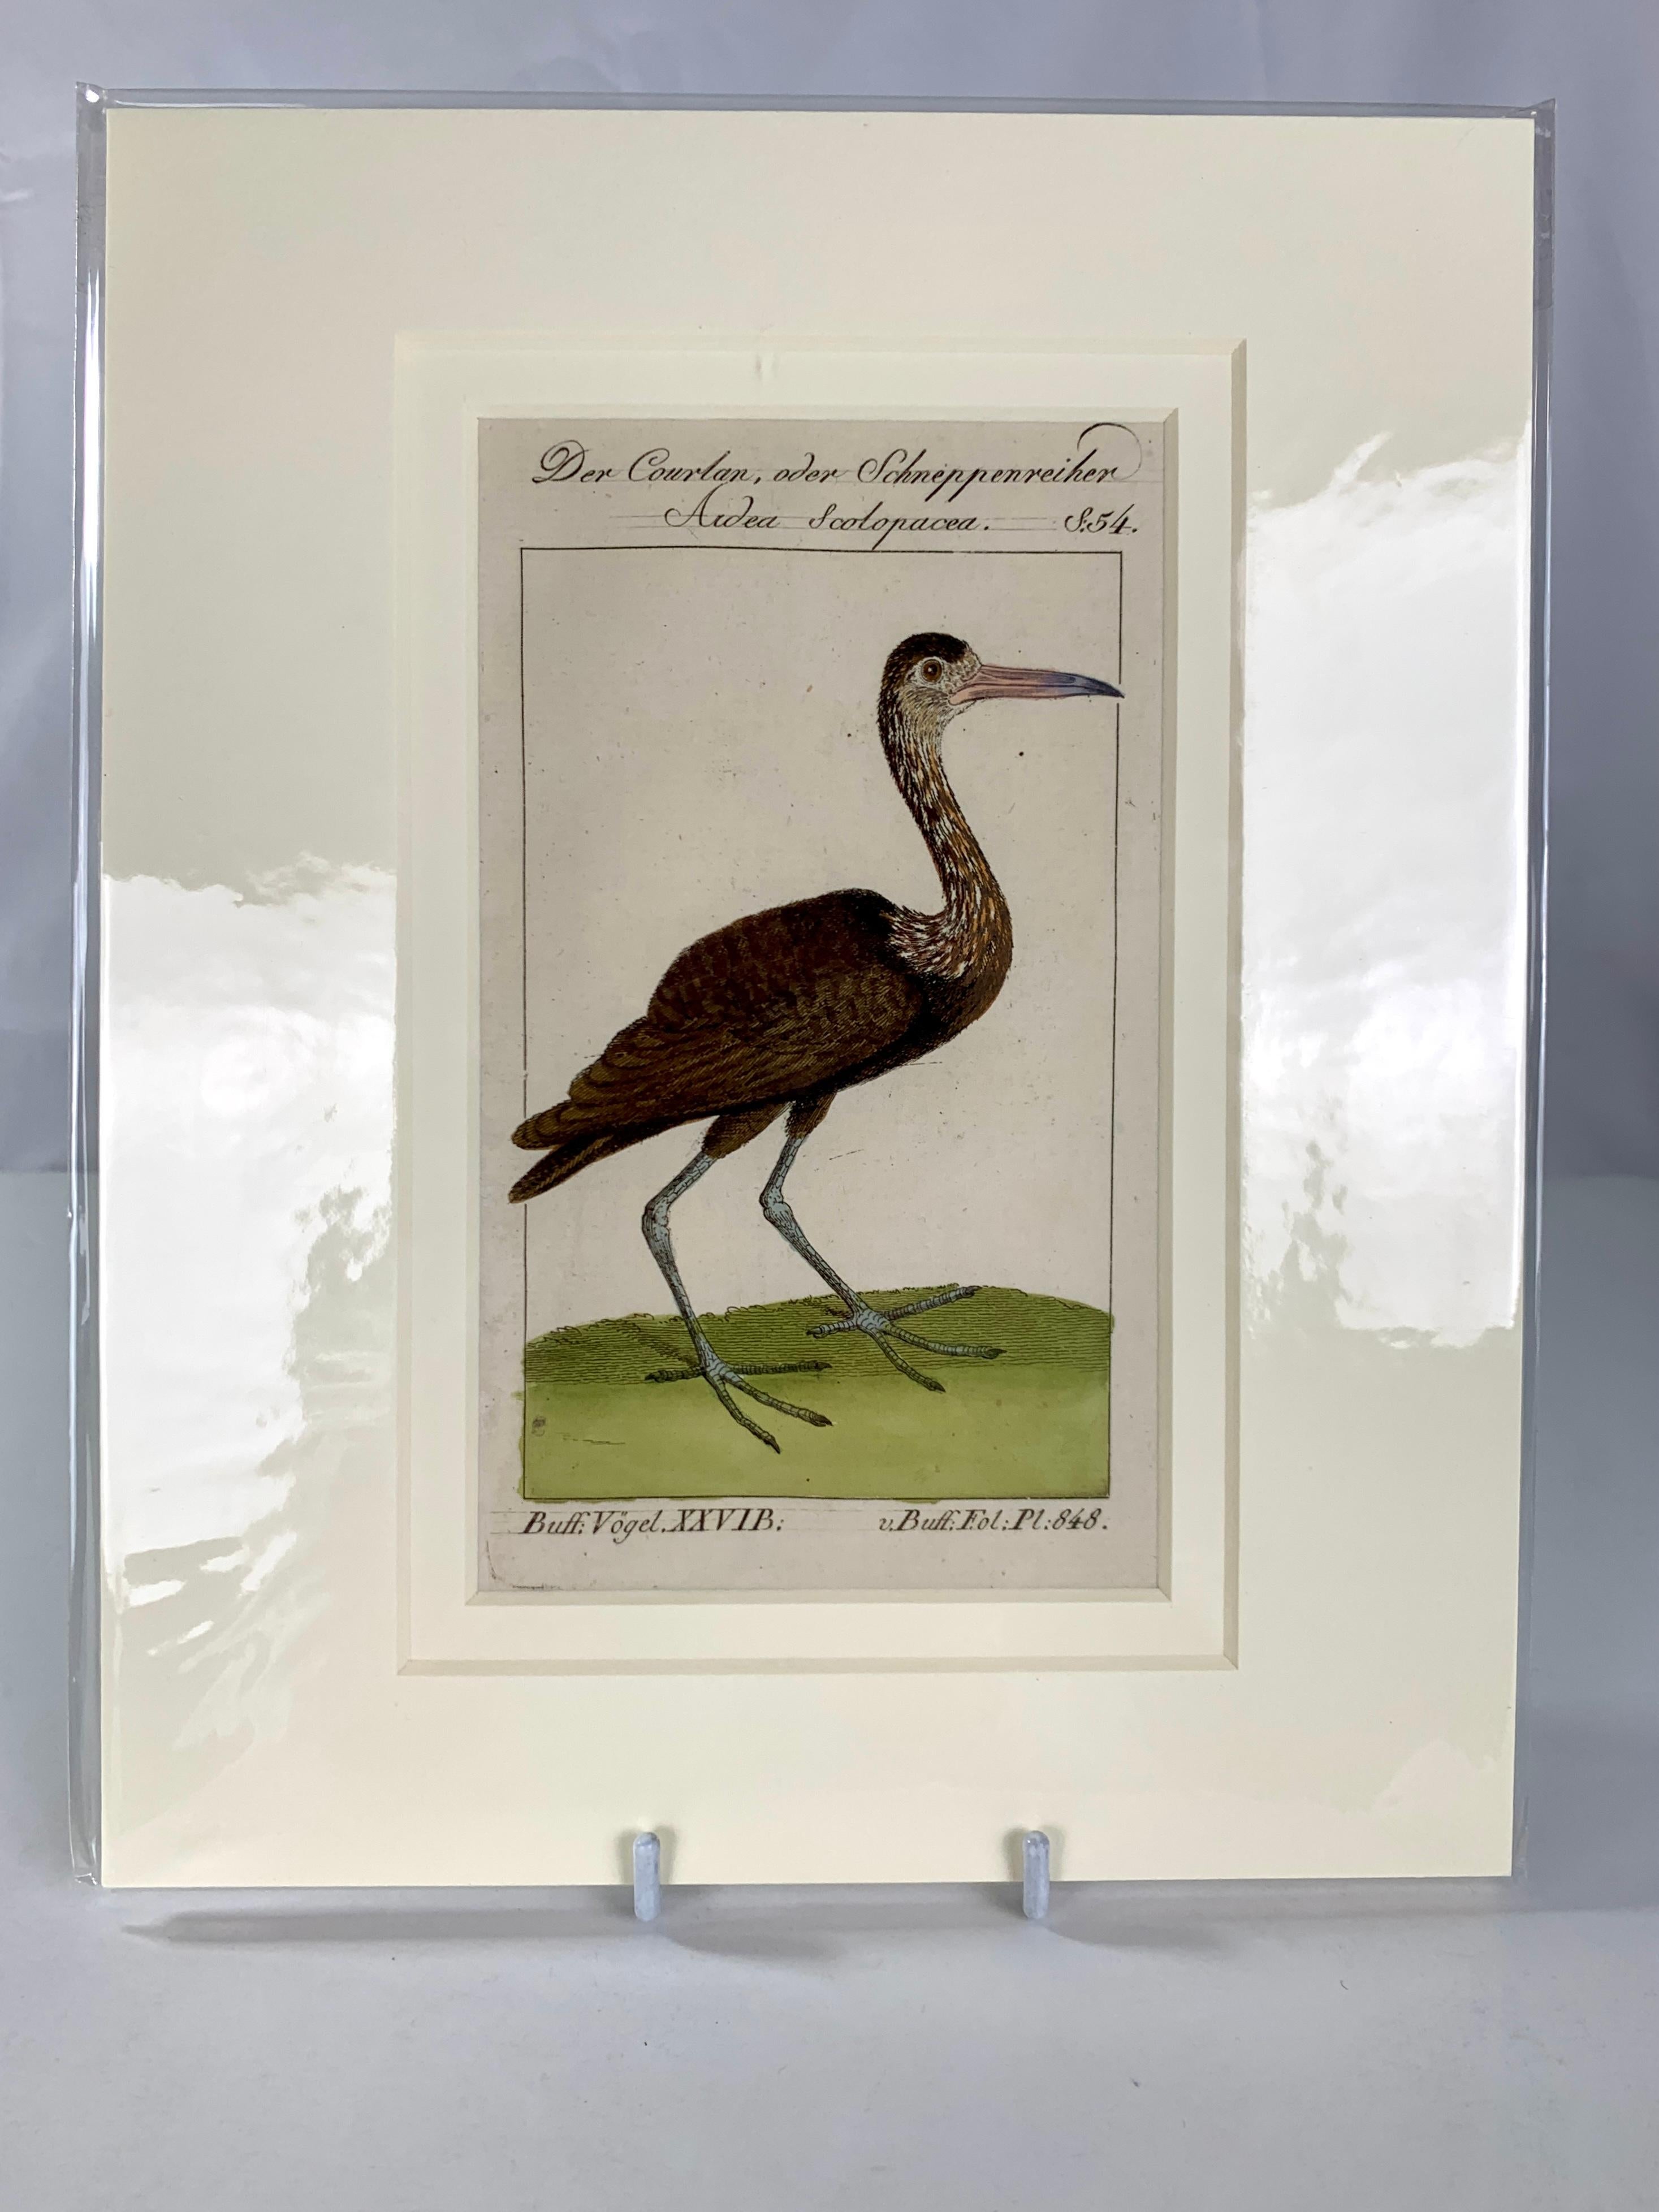 These are beautifully drawn, detailed copperplate engravings from one of the most important ornithological works of the 18th century.  They are rare and compelling hand-colored engravings printed on original 18th-century rag paper taken from the